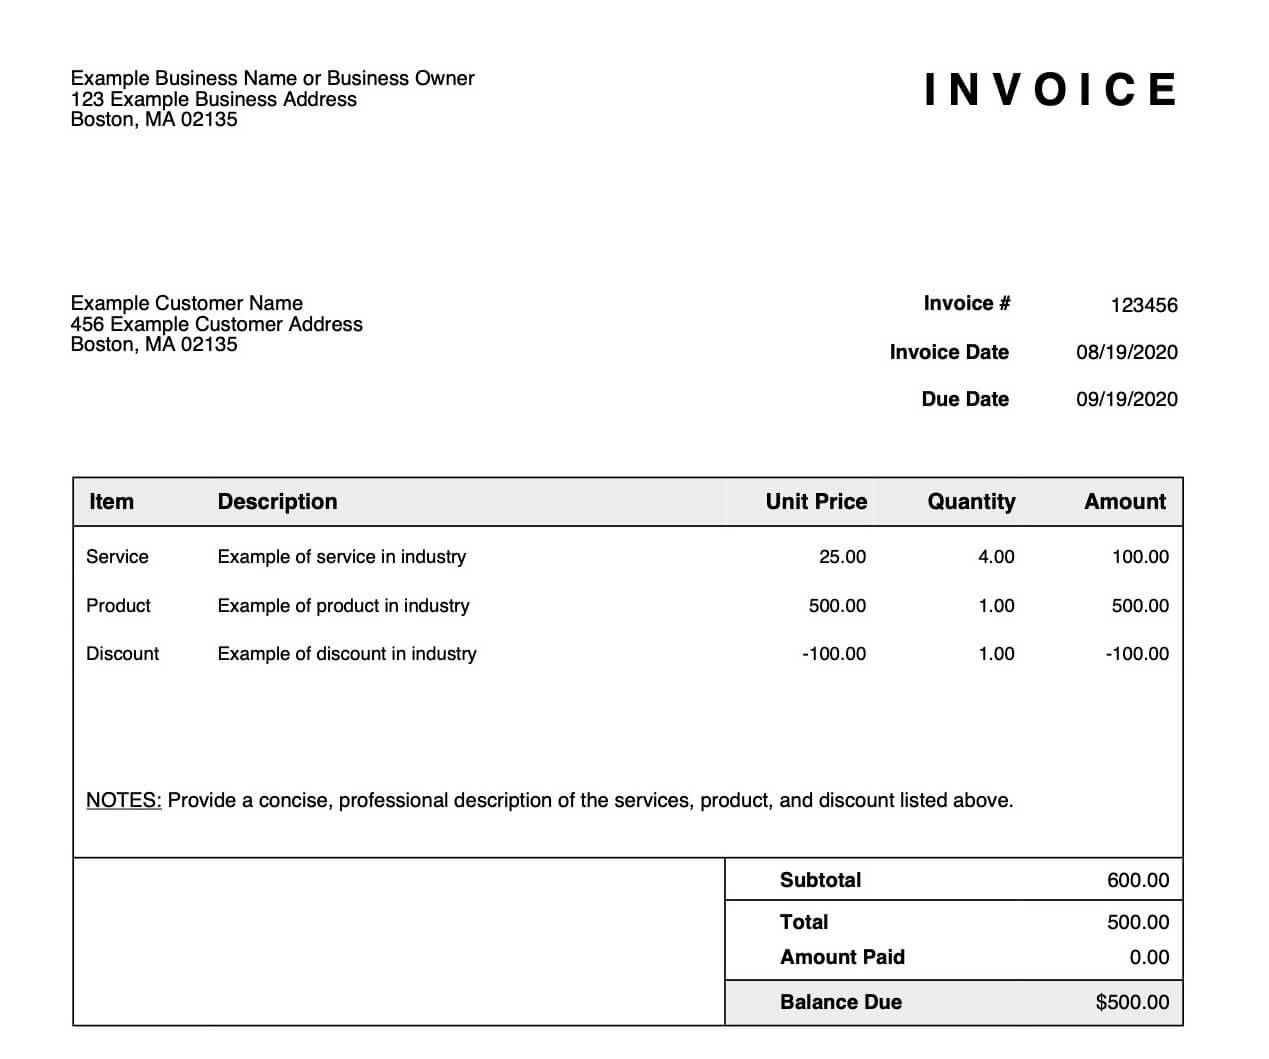 complete-guide-to-invoices